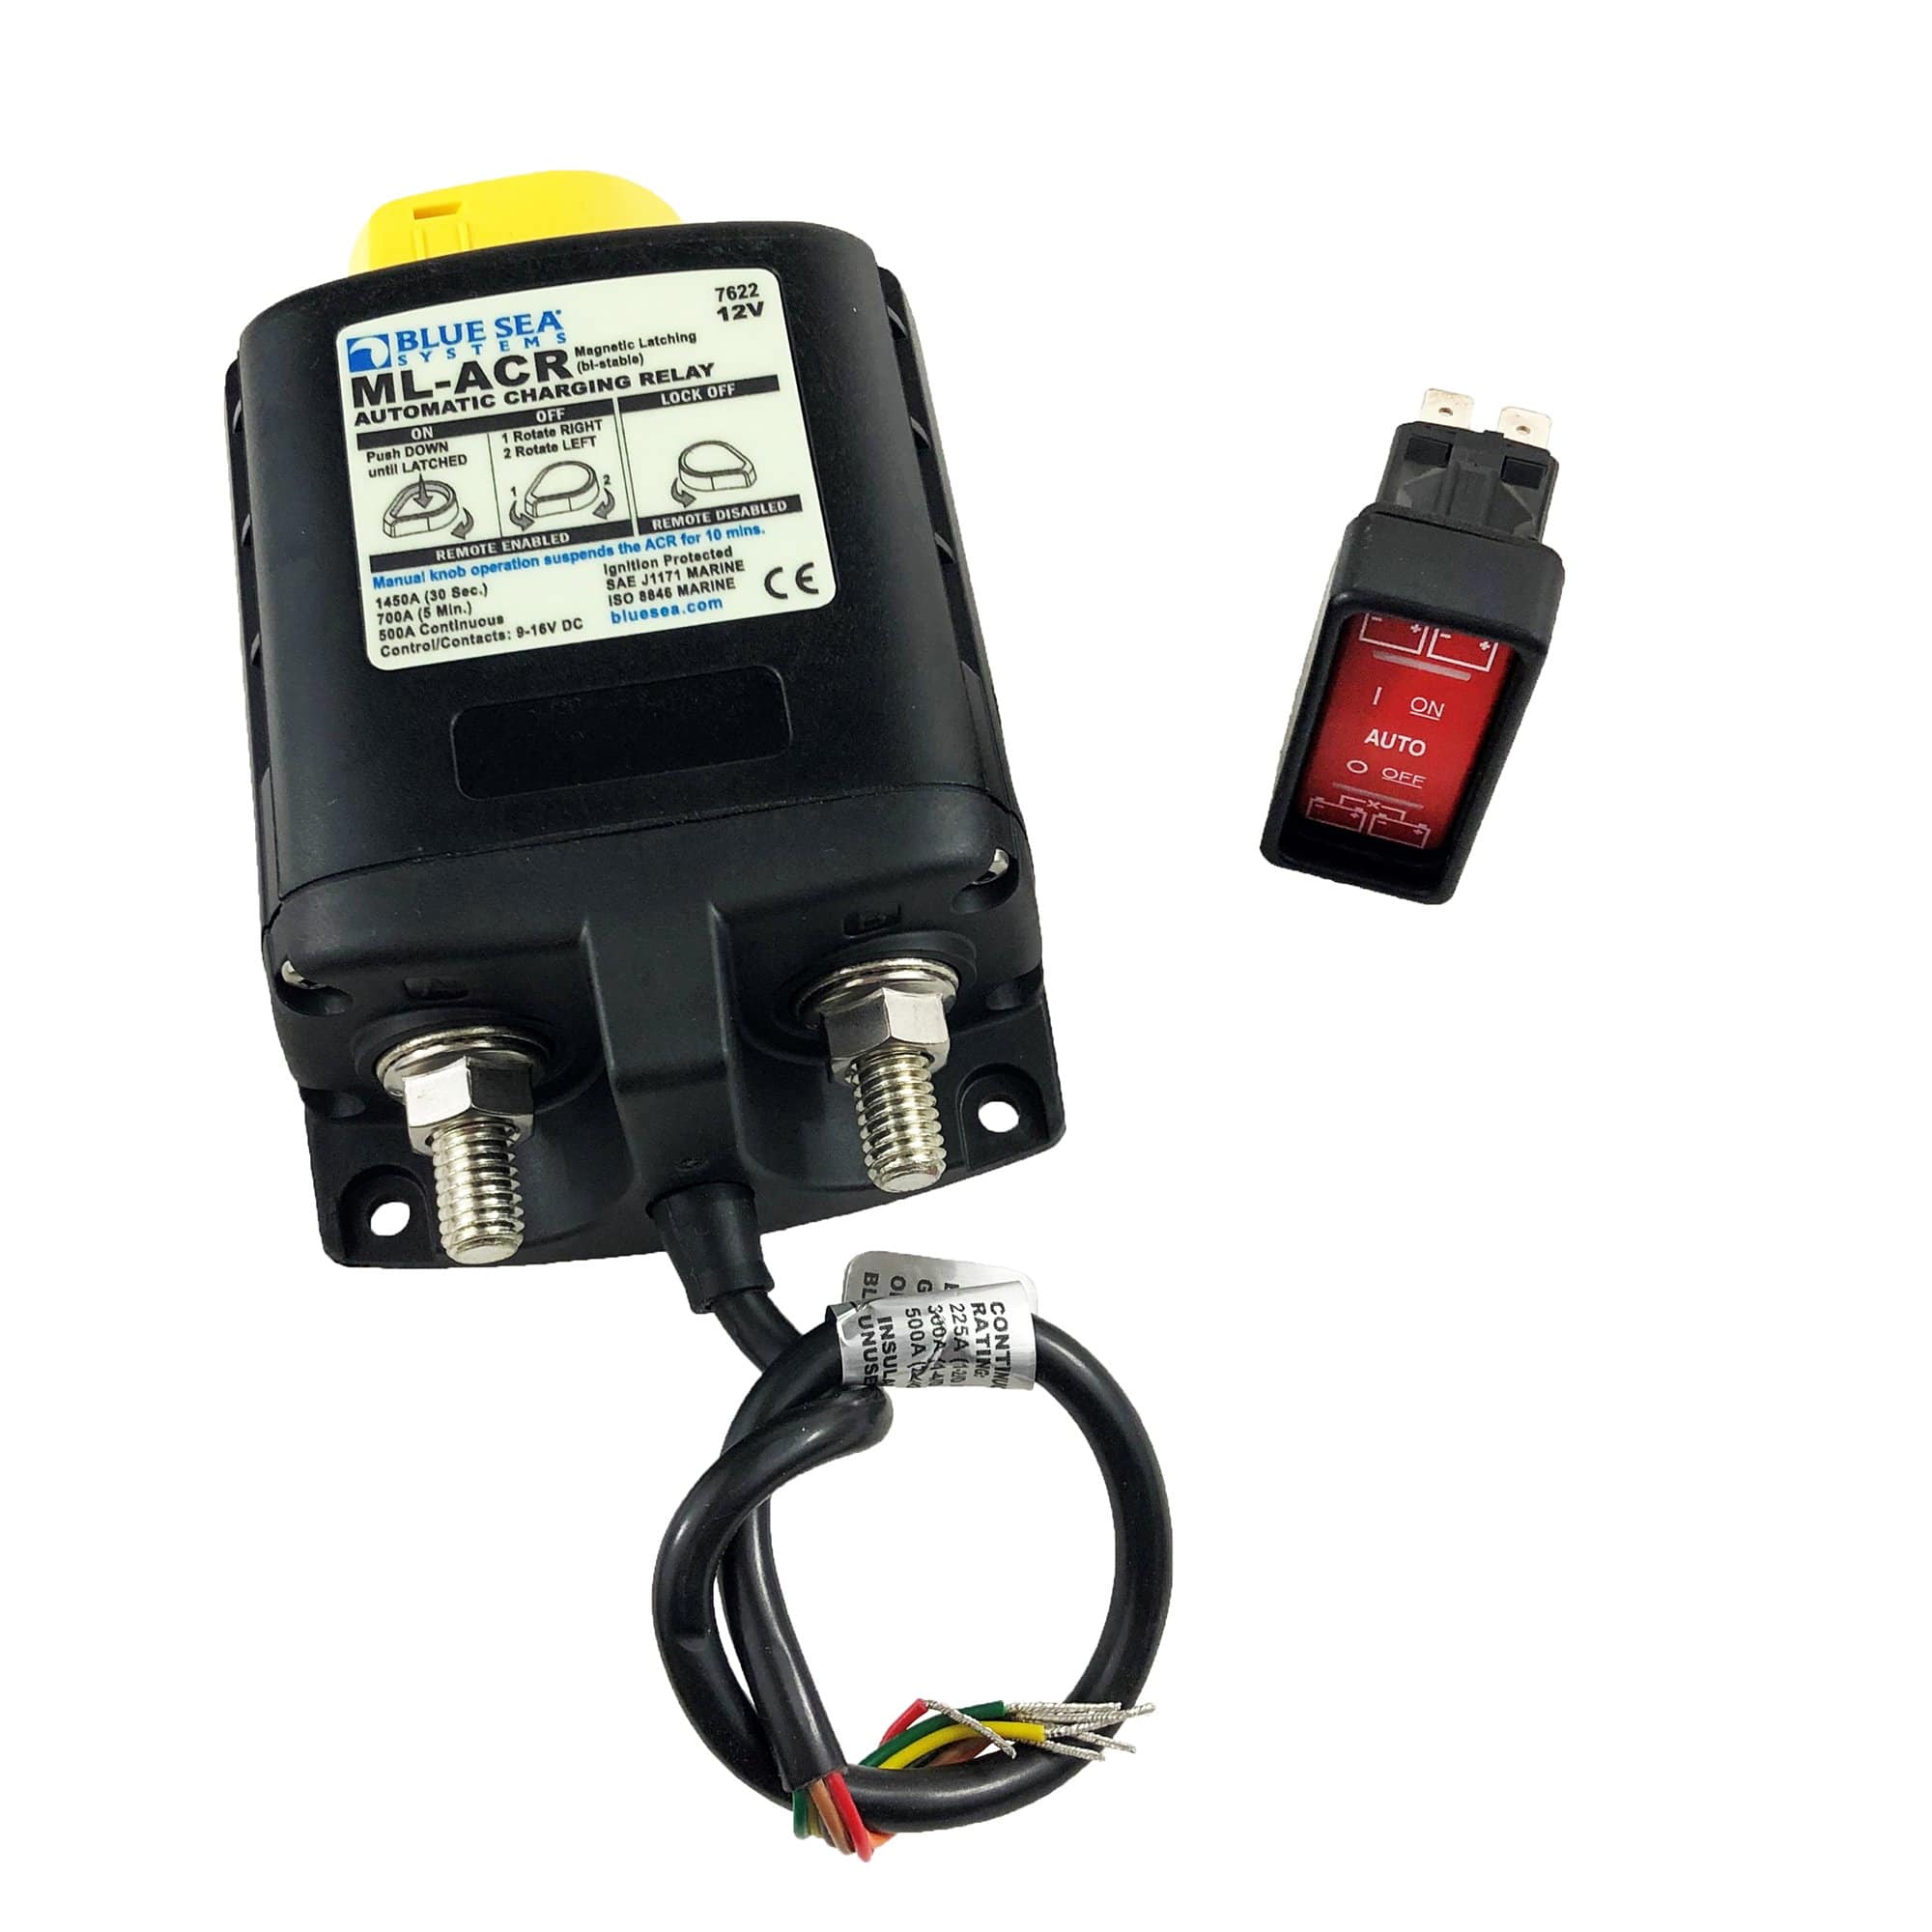 Power Products Blue Sea Systems 7622-BSS ML-ACR Automatic Charging Relay with Manual Control 12V DC 500A